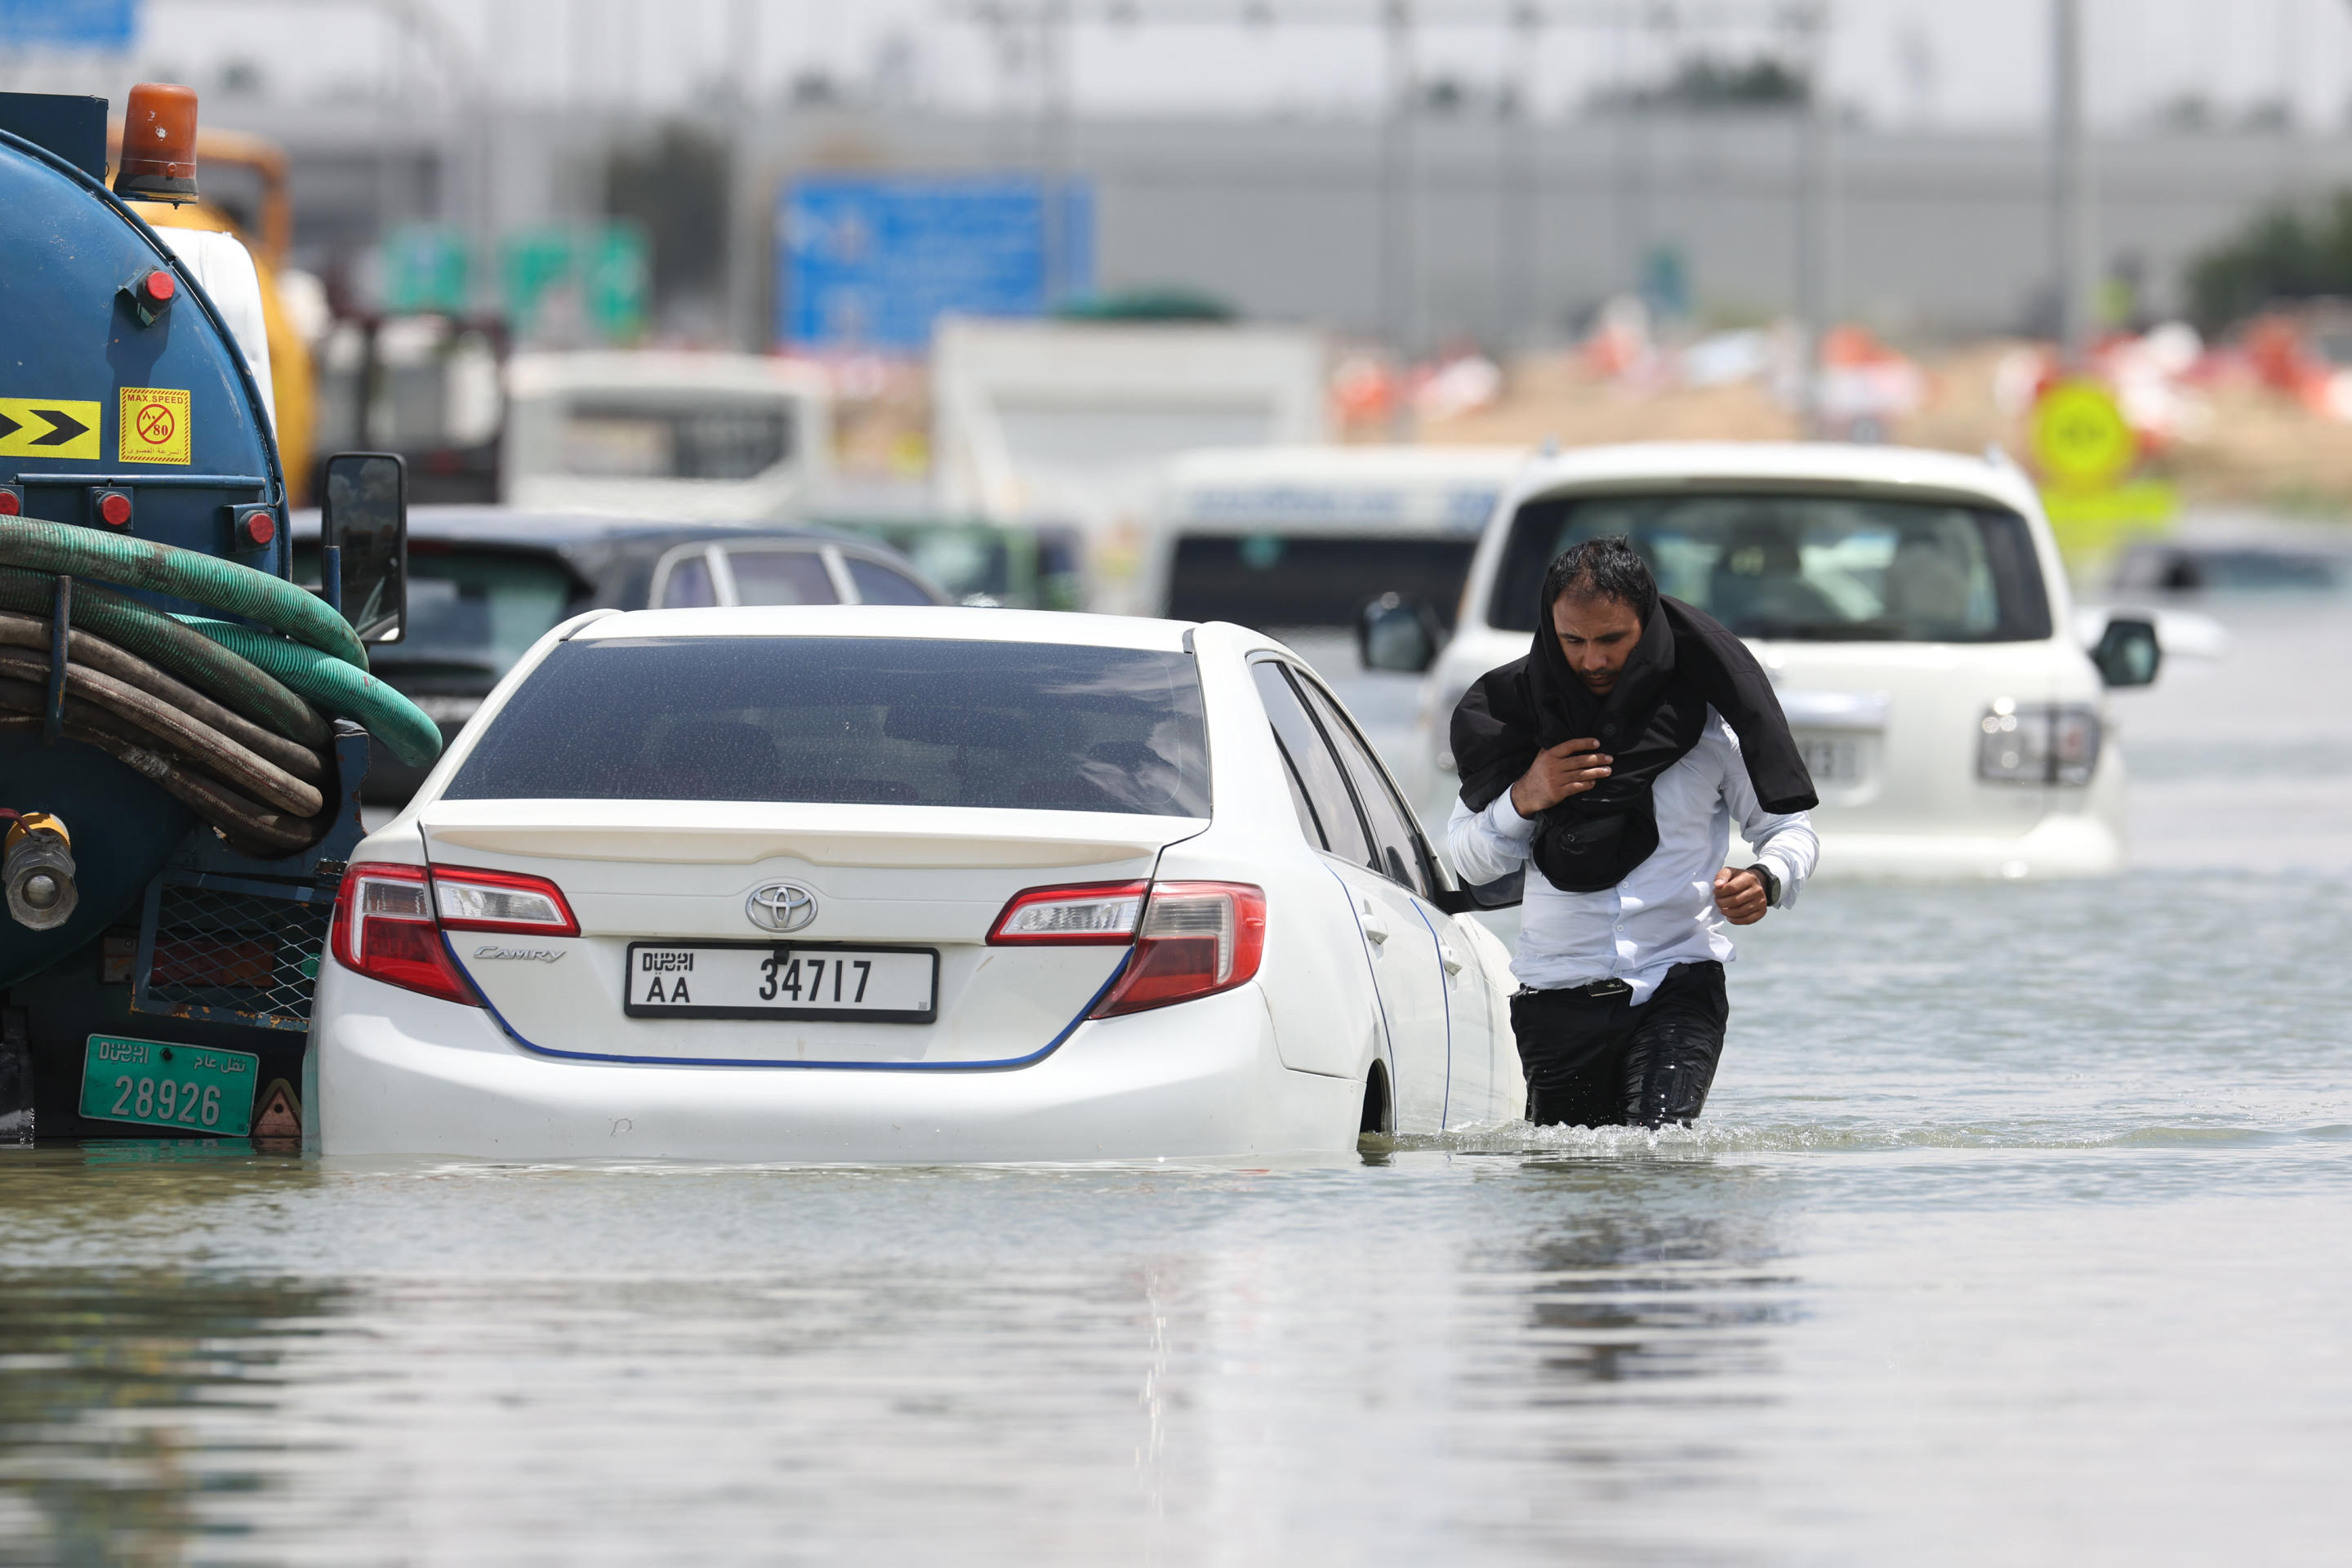 A driver walks through floodwaters after abandoning his vehicle following a rainstorm.